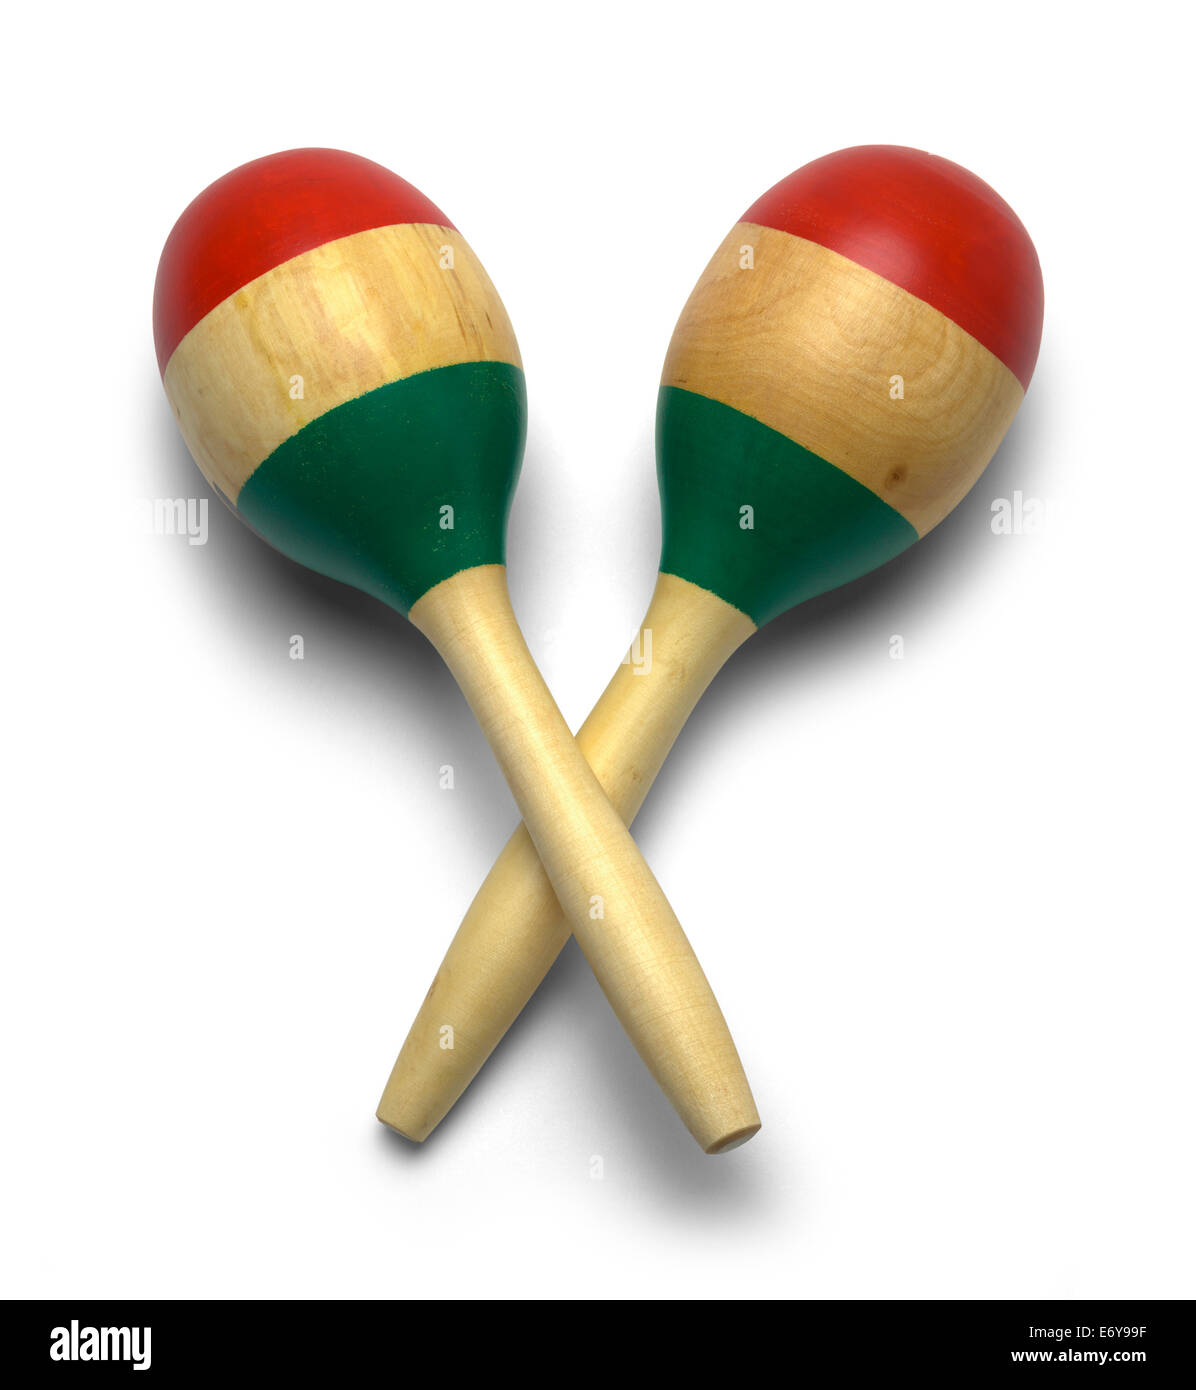 Cross Wooden Mexican Maracas Isolated on White Background. Stock Photo